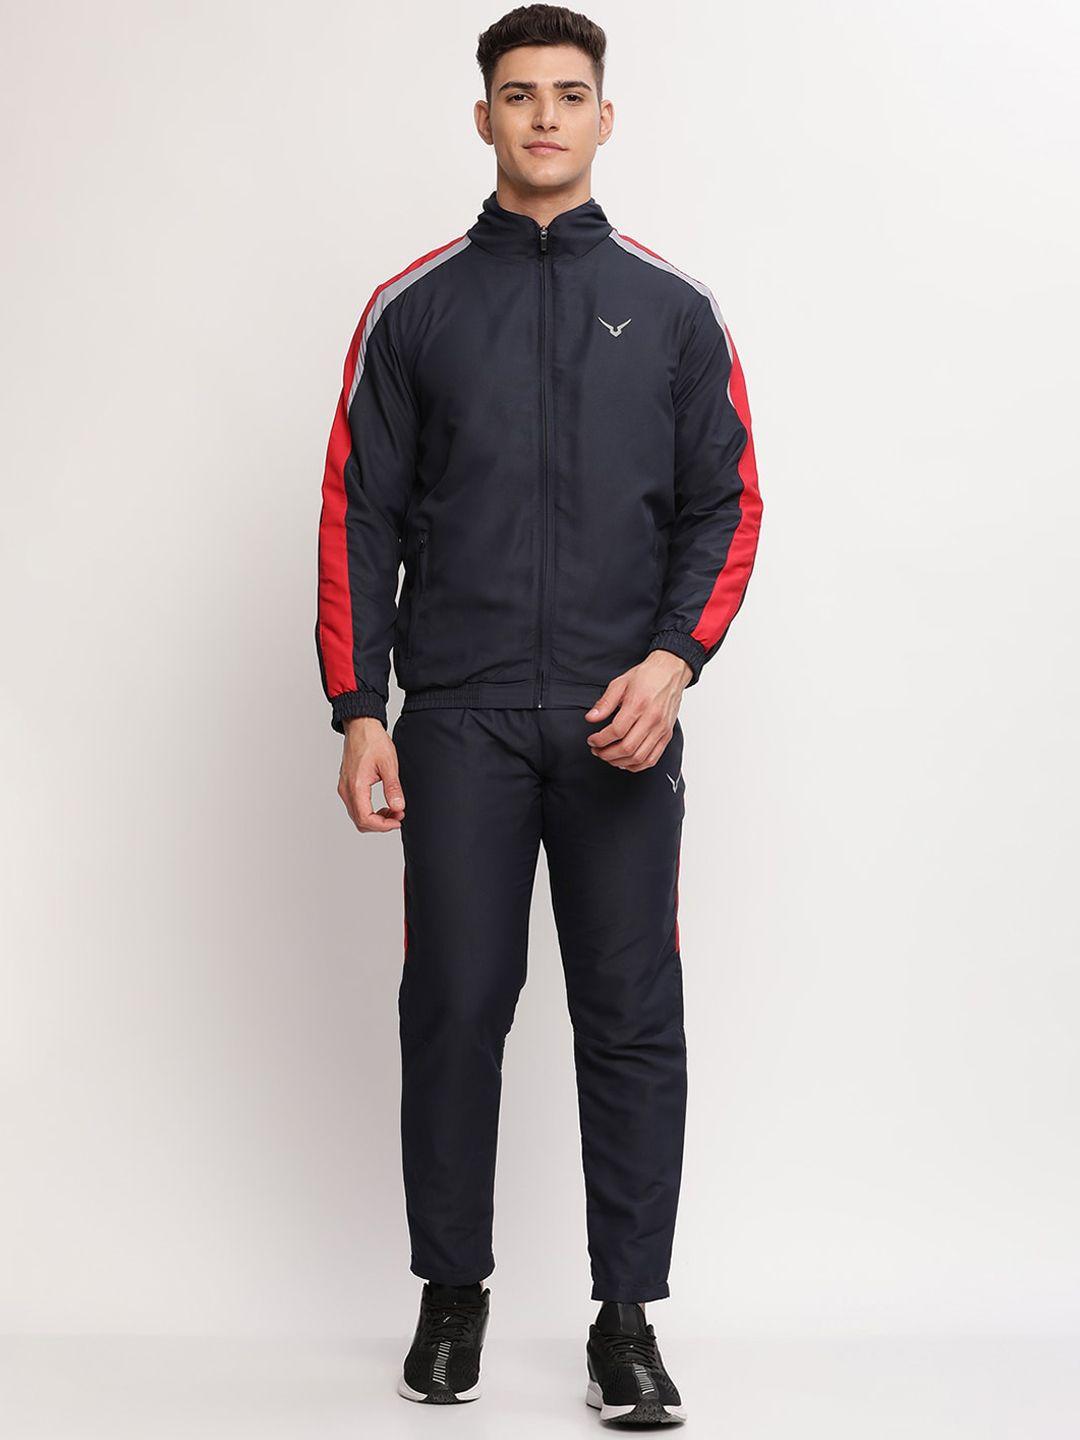 invincible men navy blue & red striped tracksuits